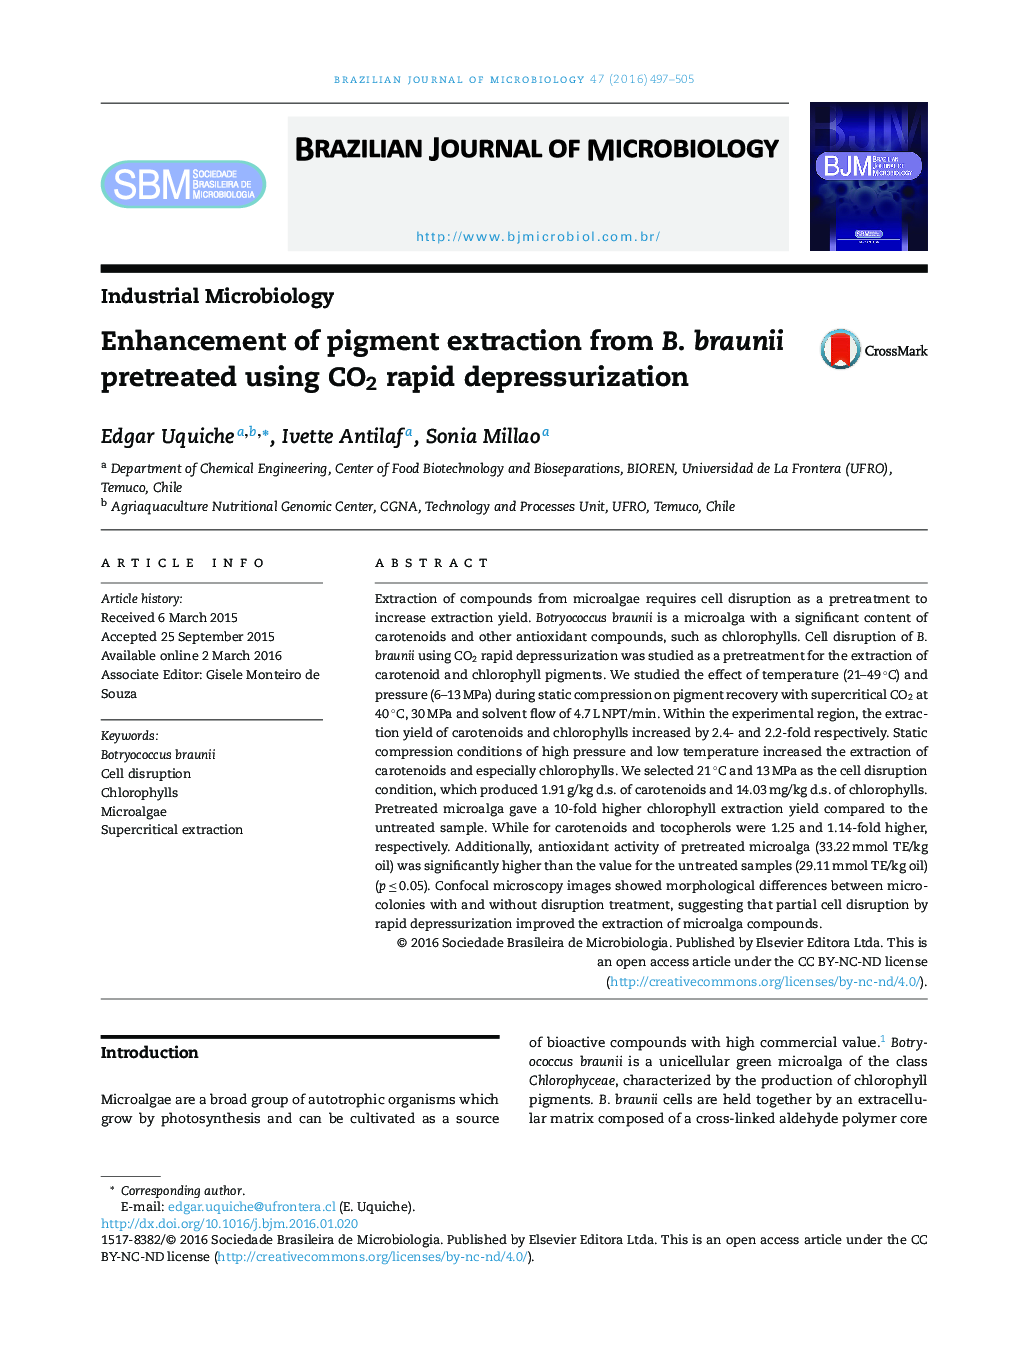 Enhancement of pigment extraction from B. braunii pretreated using CO2 rapid depressurization